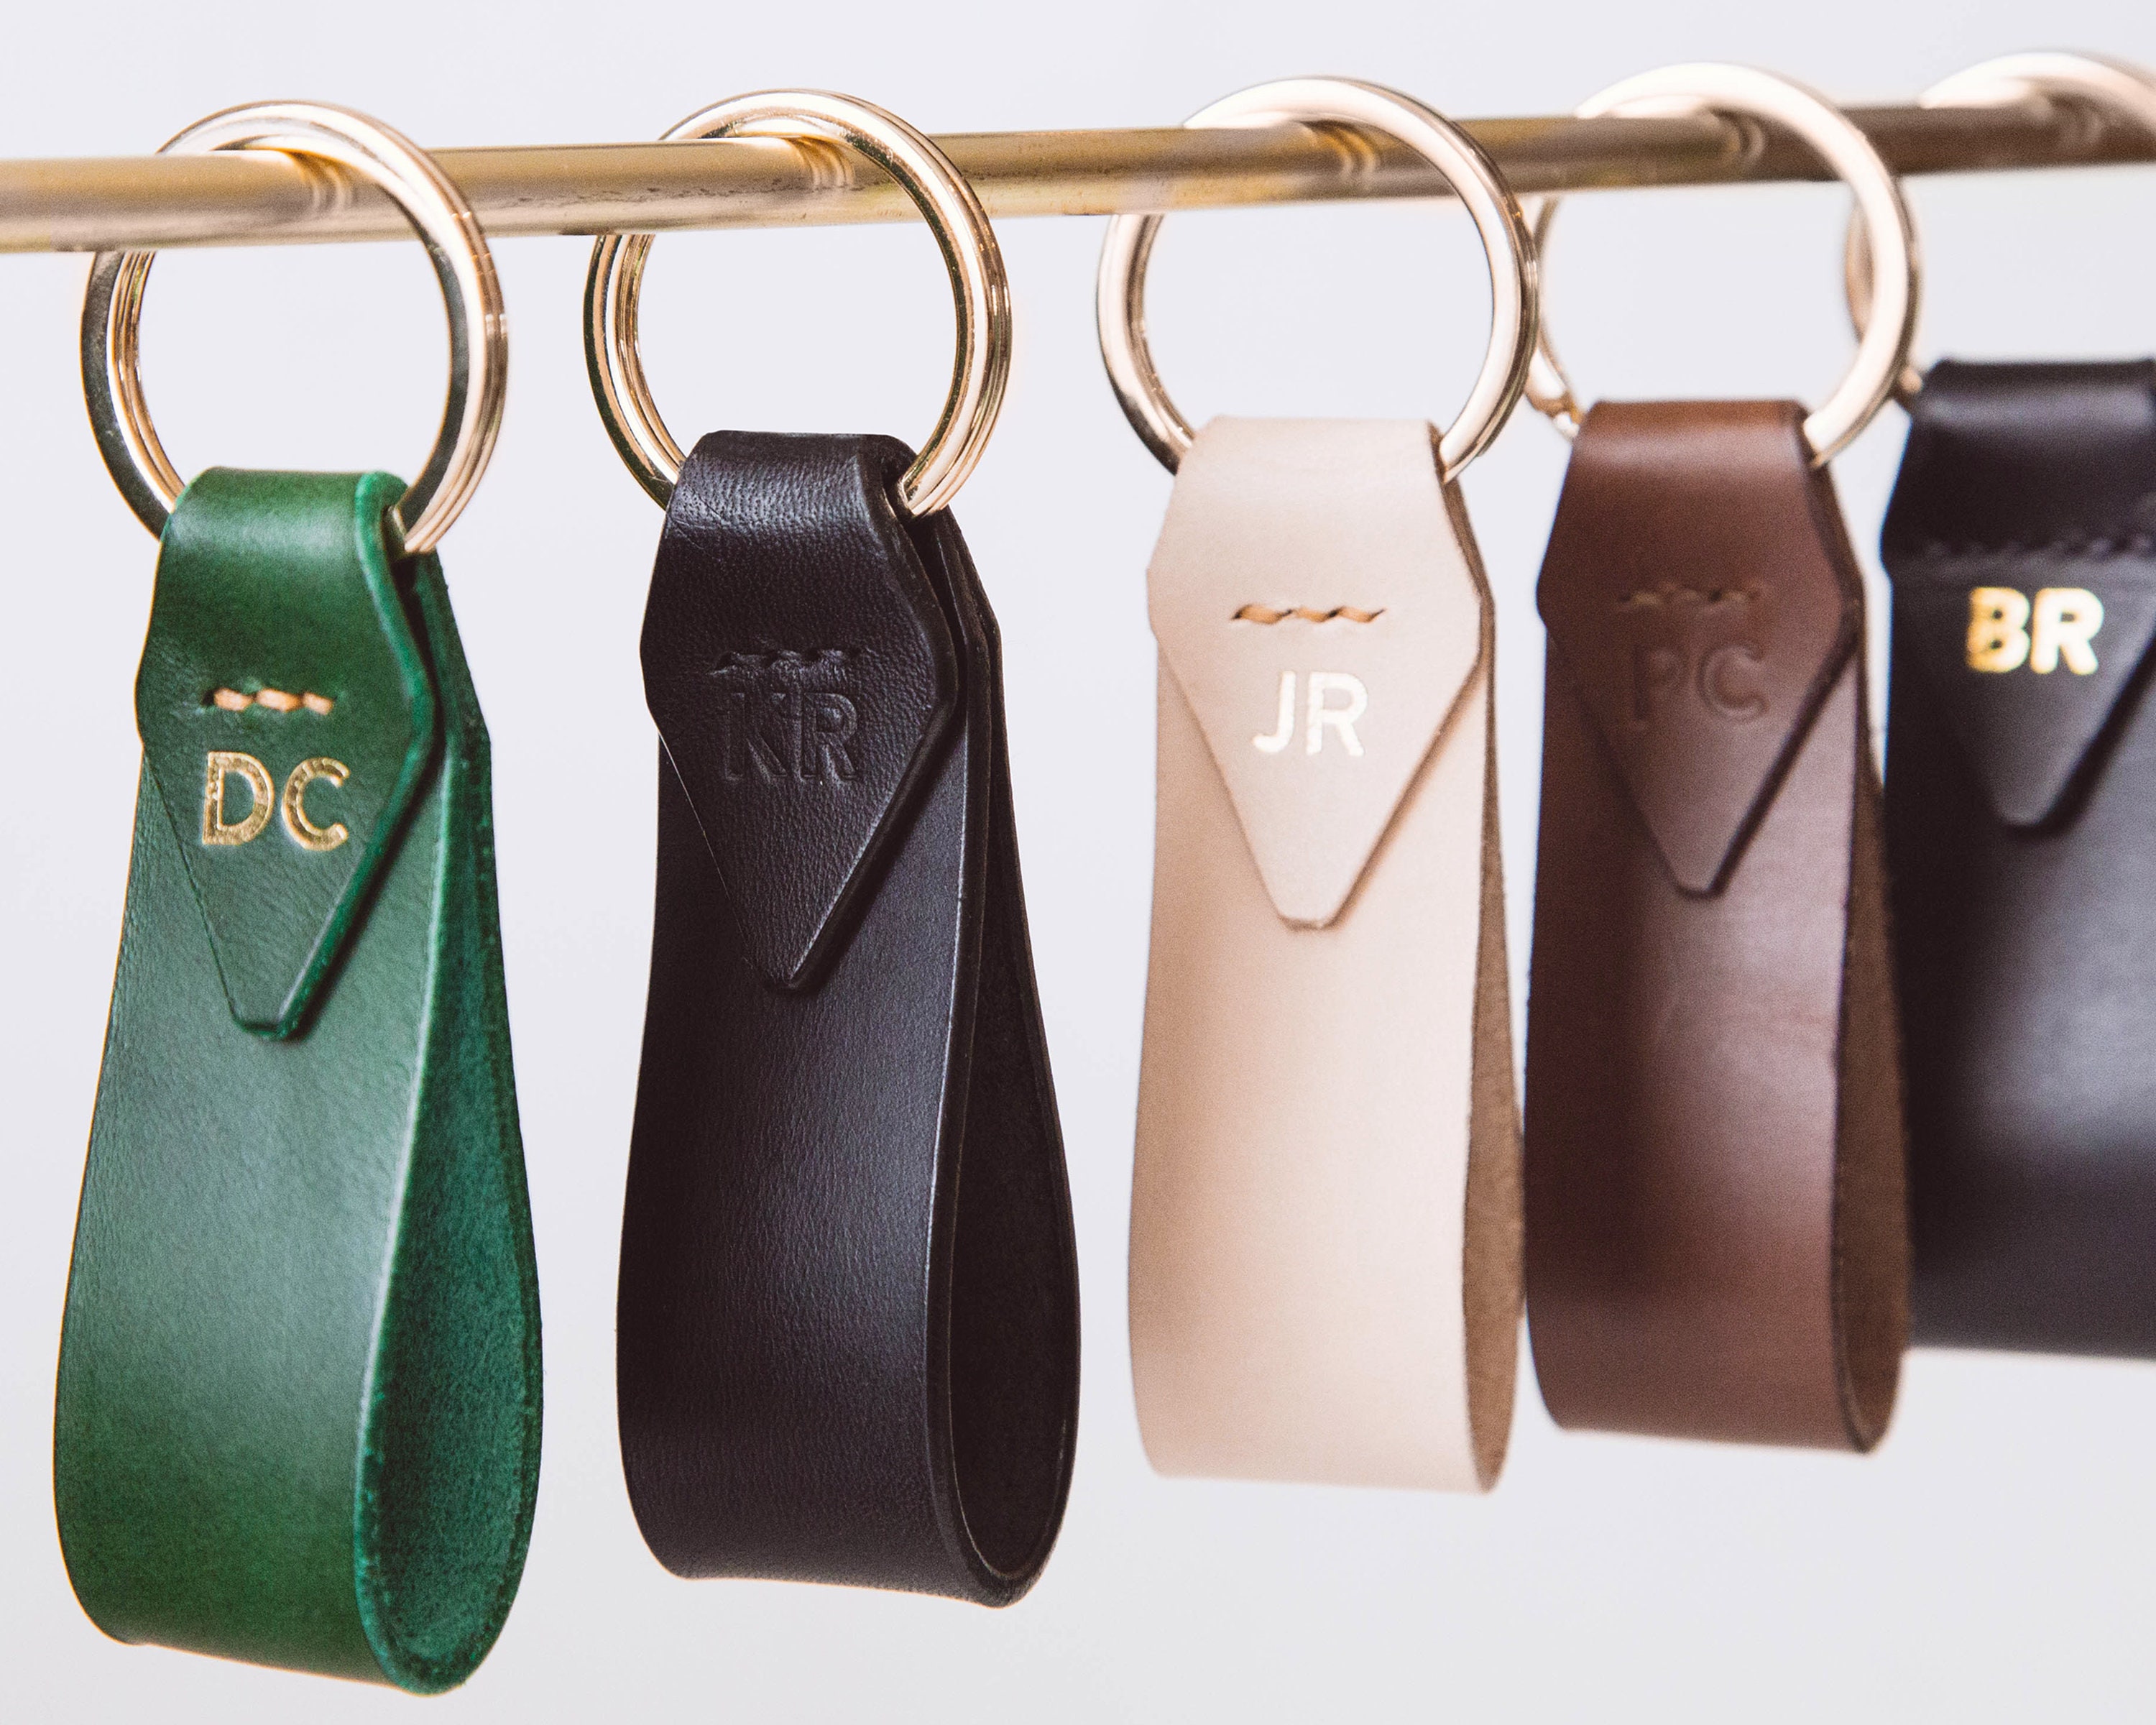 Repurposed Louis Vuitton Leather Key Chain 5 – N.Kluger Designs